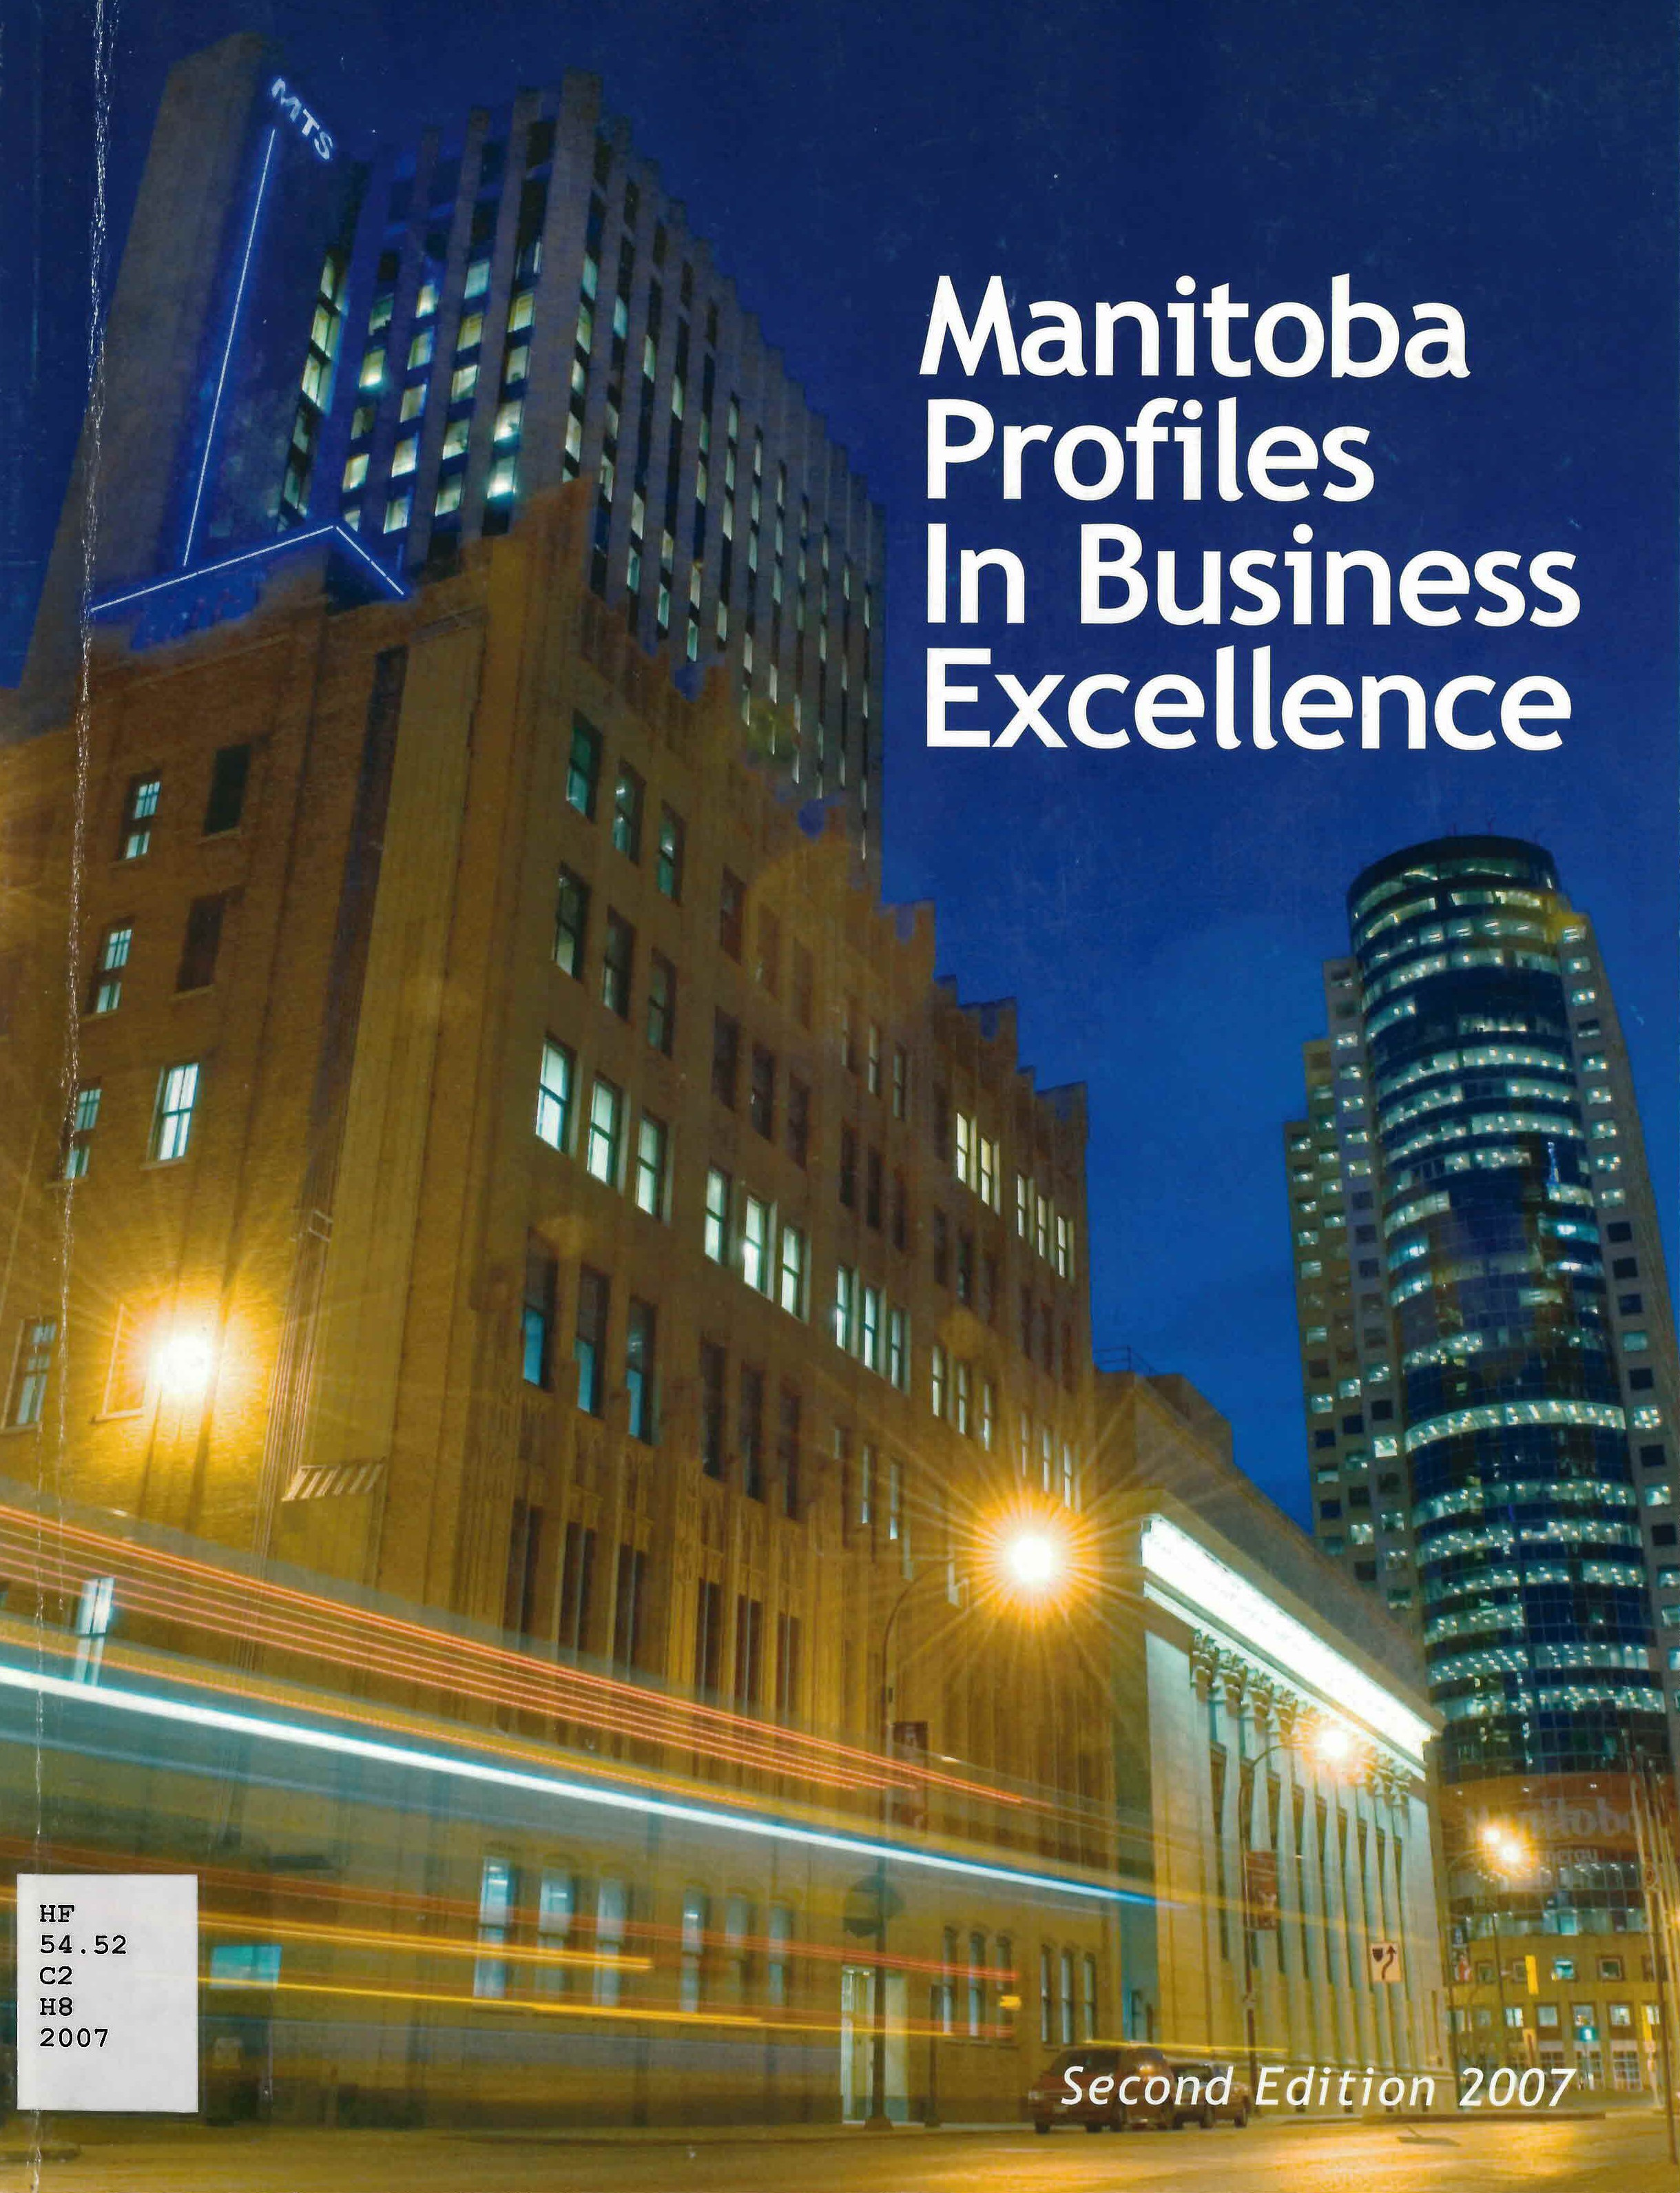 Manitoba profiles in business excellence